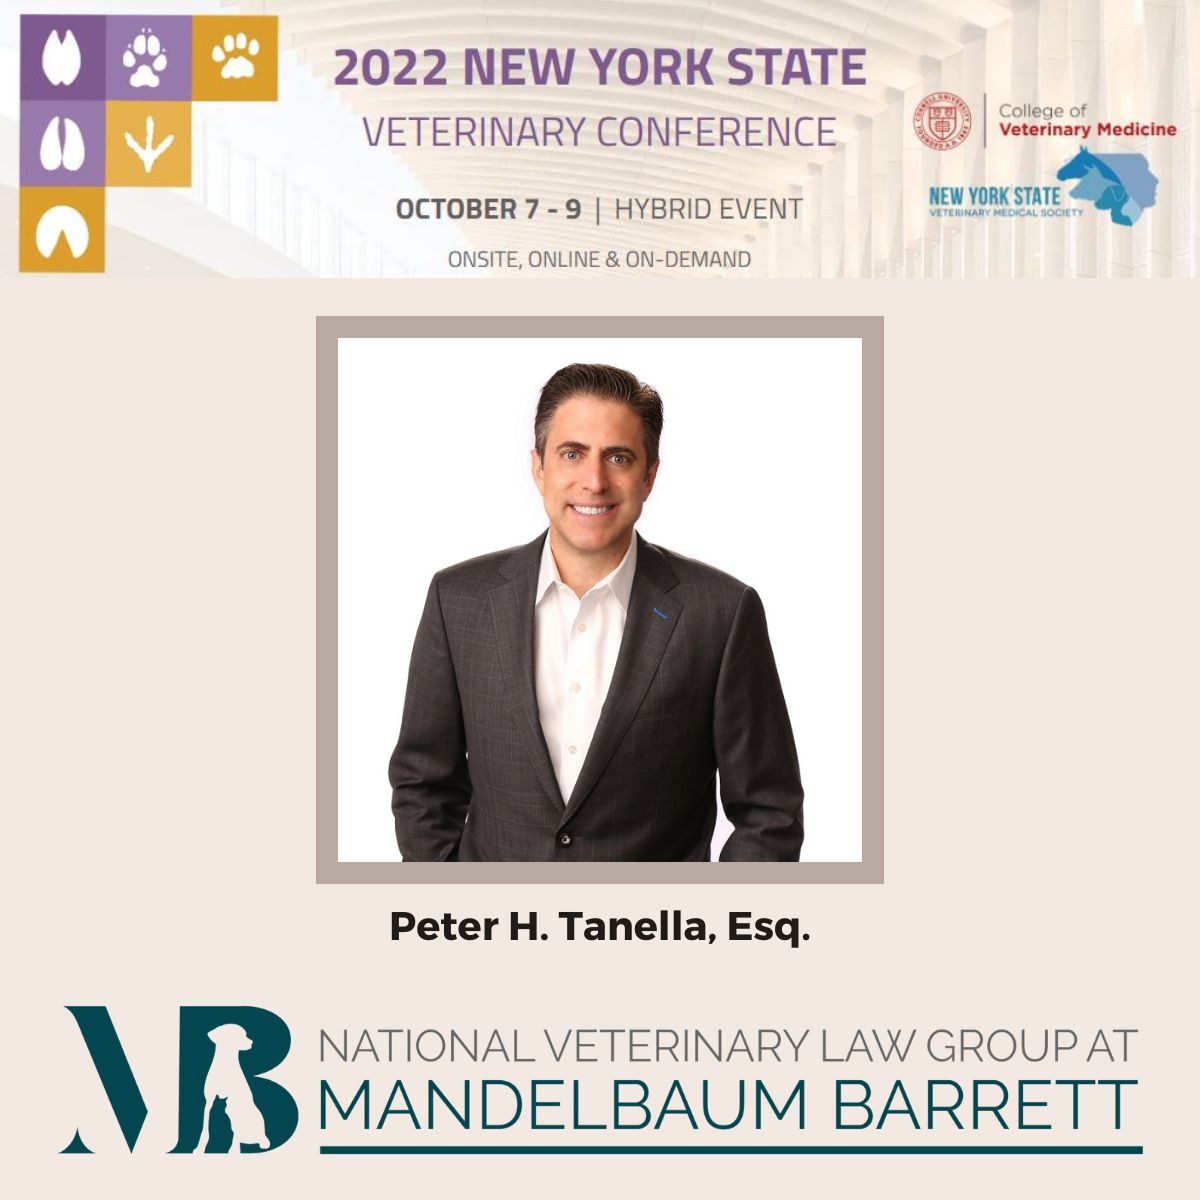 Peter Tanella will be exhibiting at the New York State Veterinary